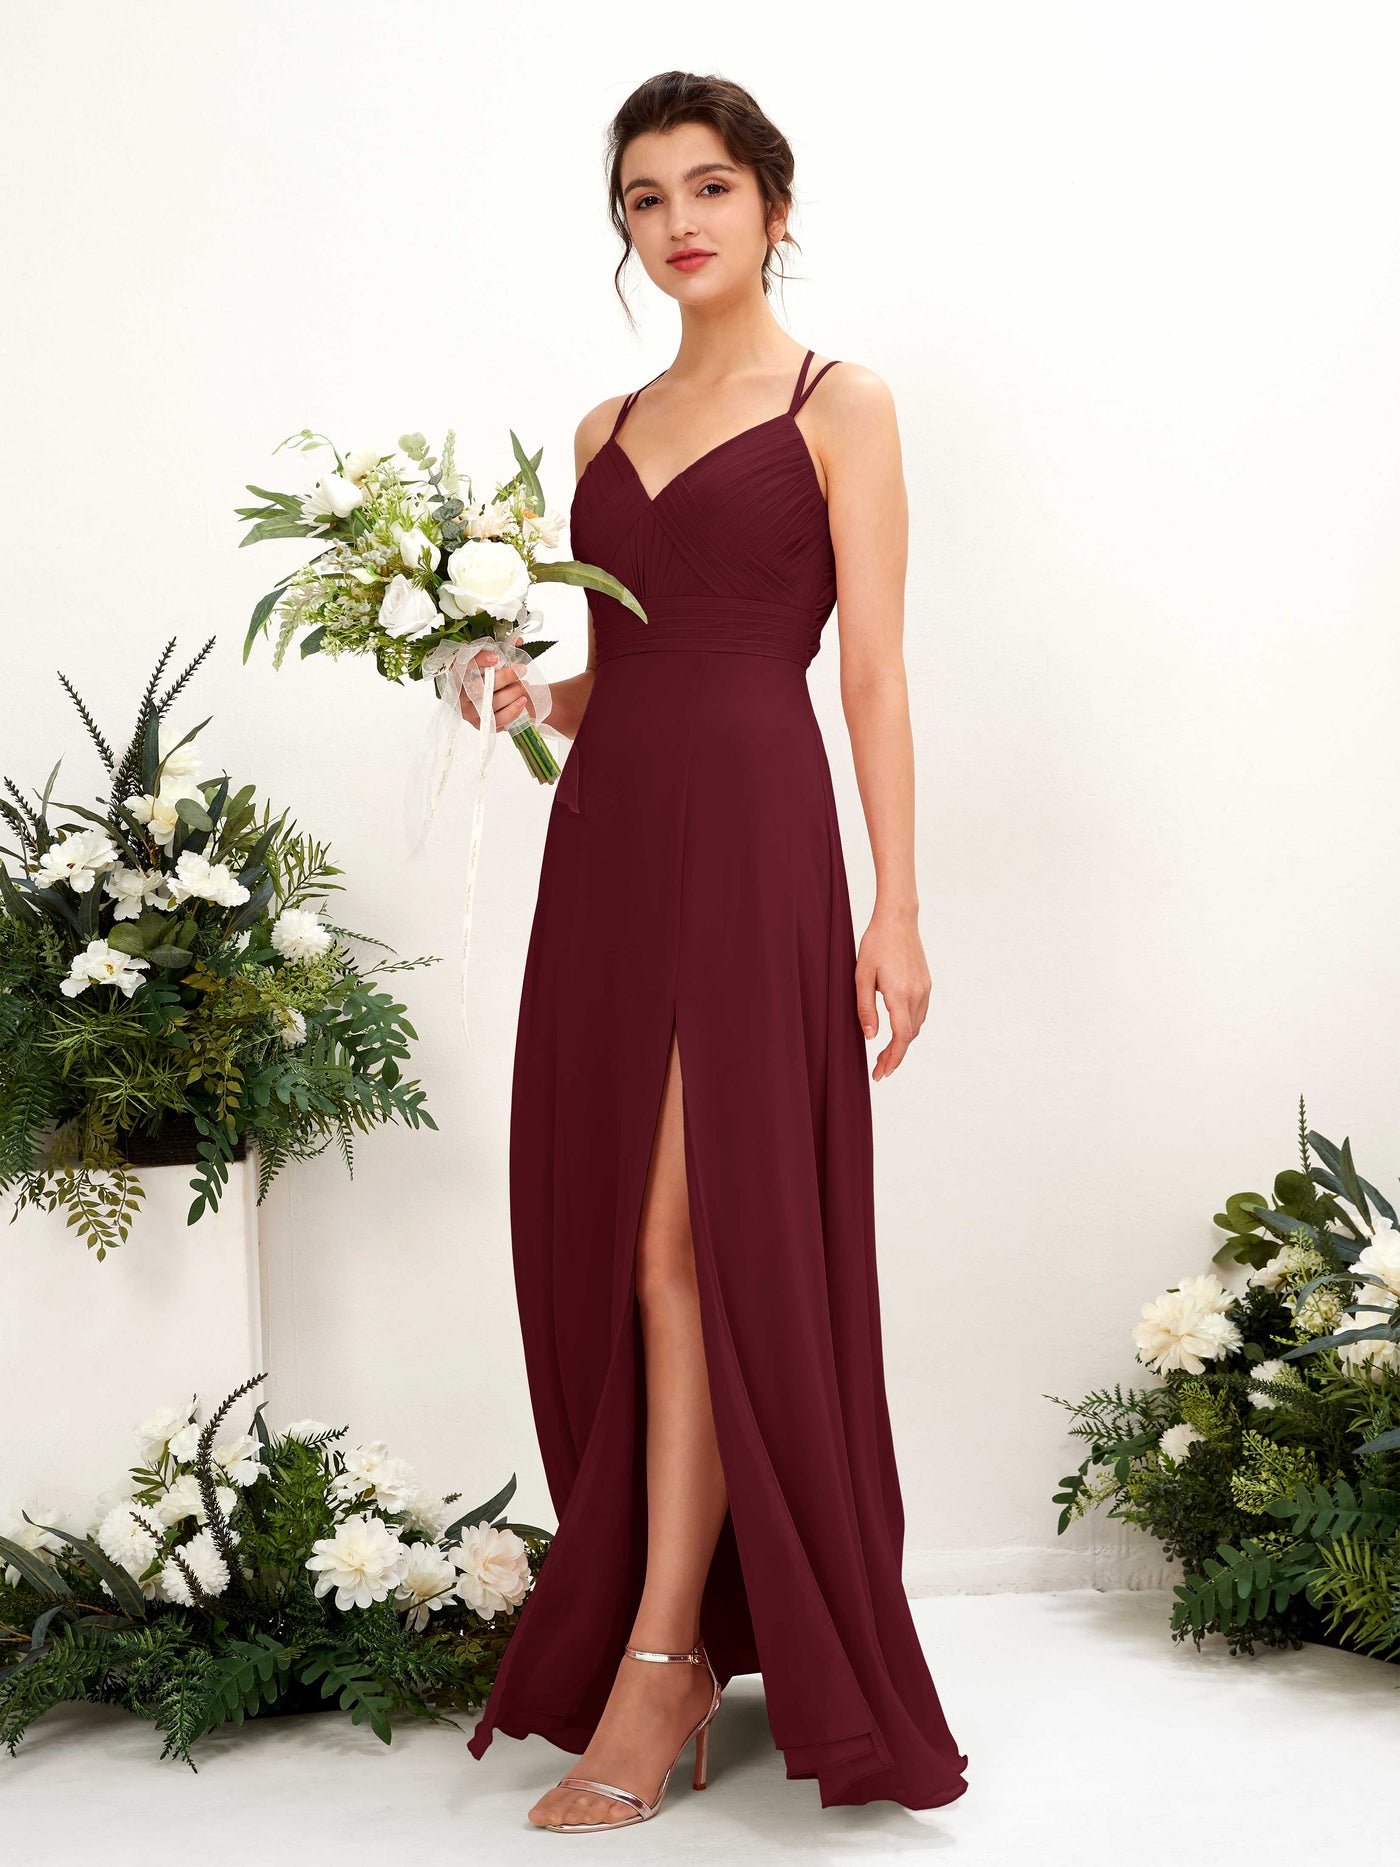 Sexy Long Chiffon Champagne Bridesmaid Dresses with High Slit and